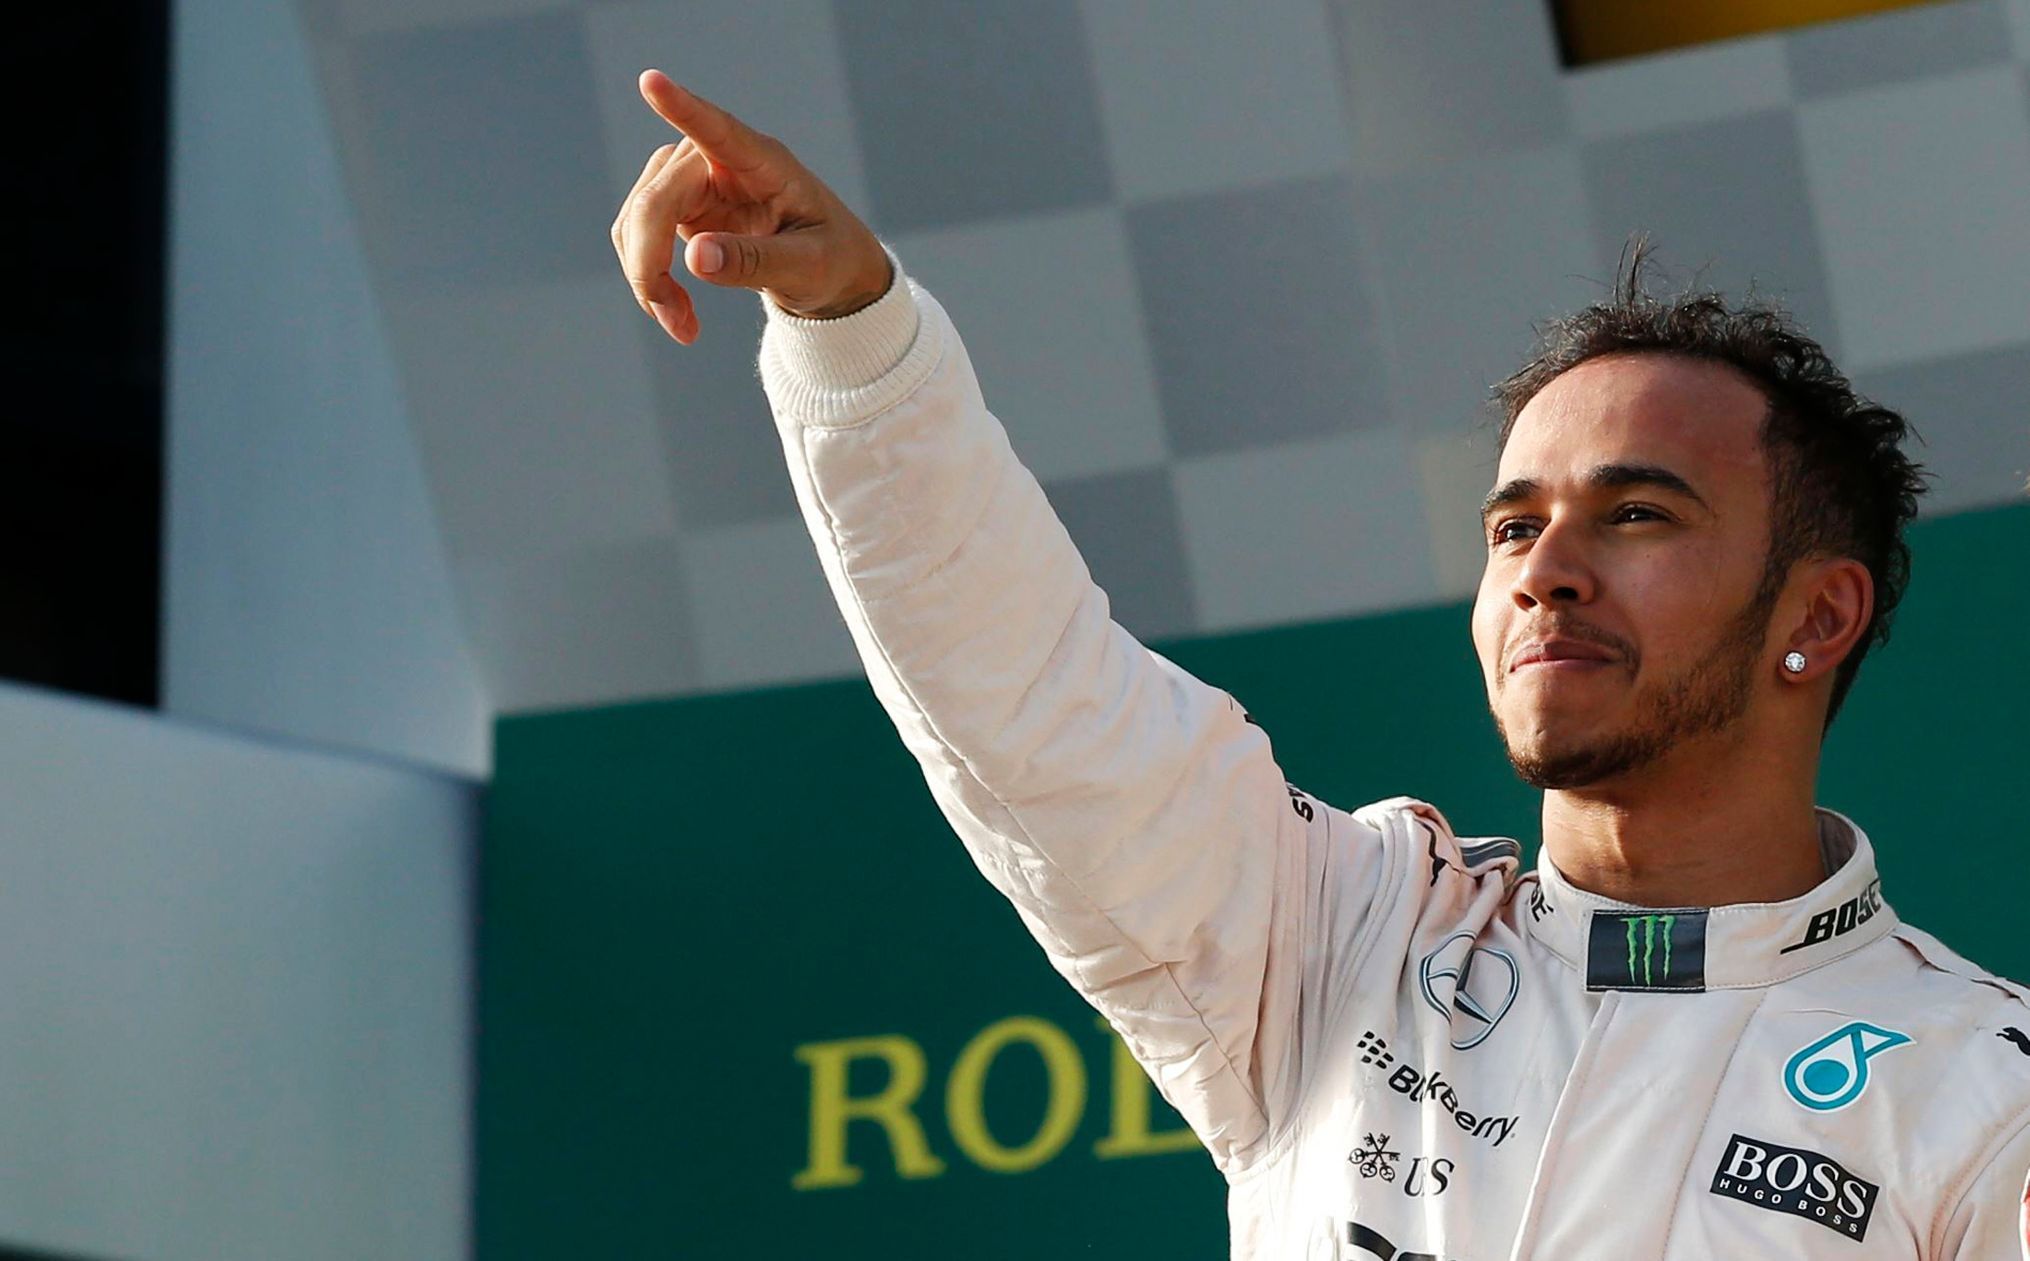 Mercedes Formula One driver Lewis Hamilton of Britain celebrates his victory on the podium after the Australian F1 Grand Prix at the Albert Park circuit in Melbourne